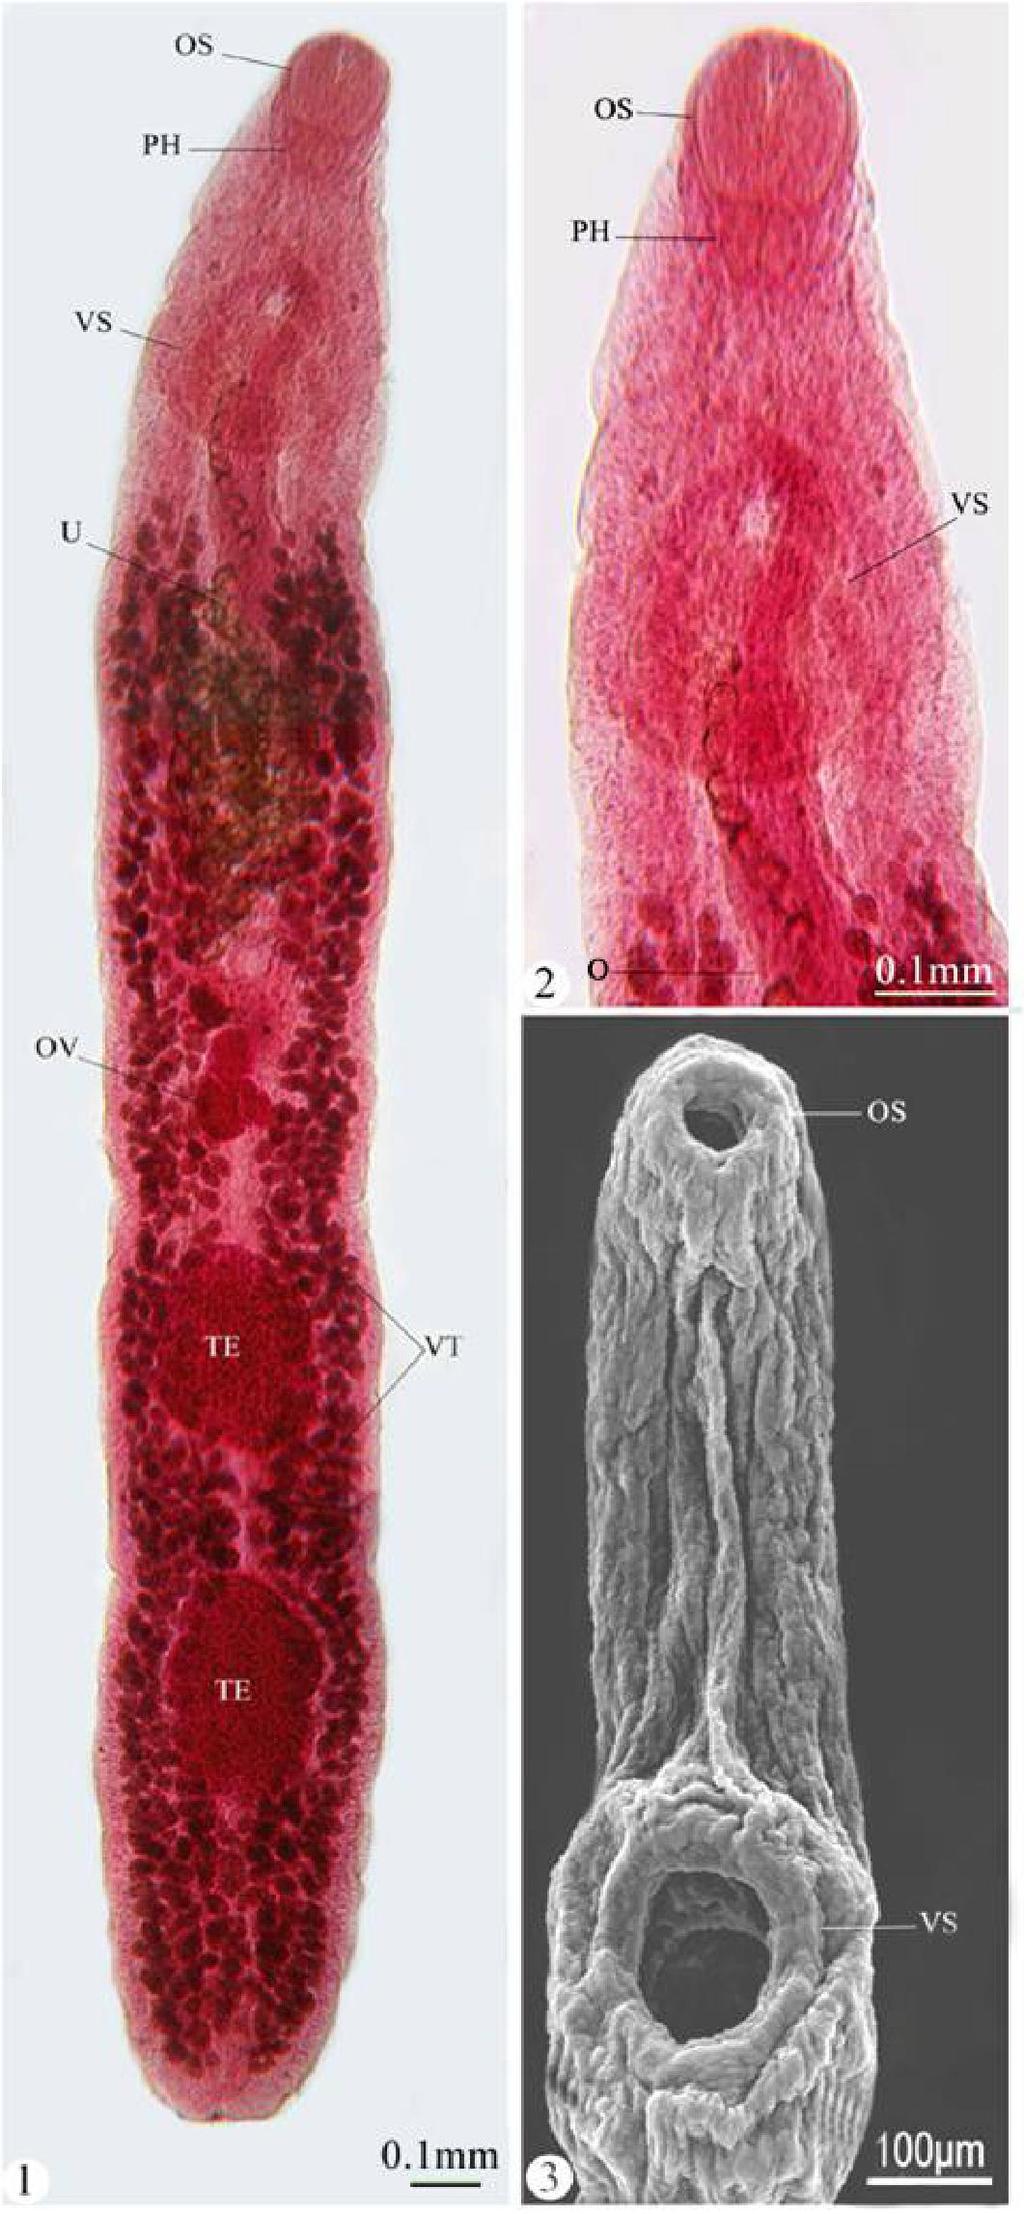 Figs.1, 2: Photomicrographs of the adult Proenenterum sp.